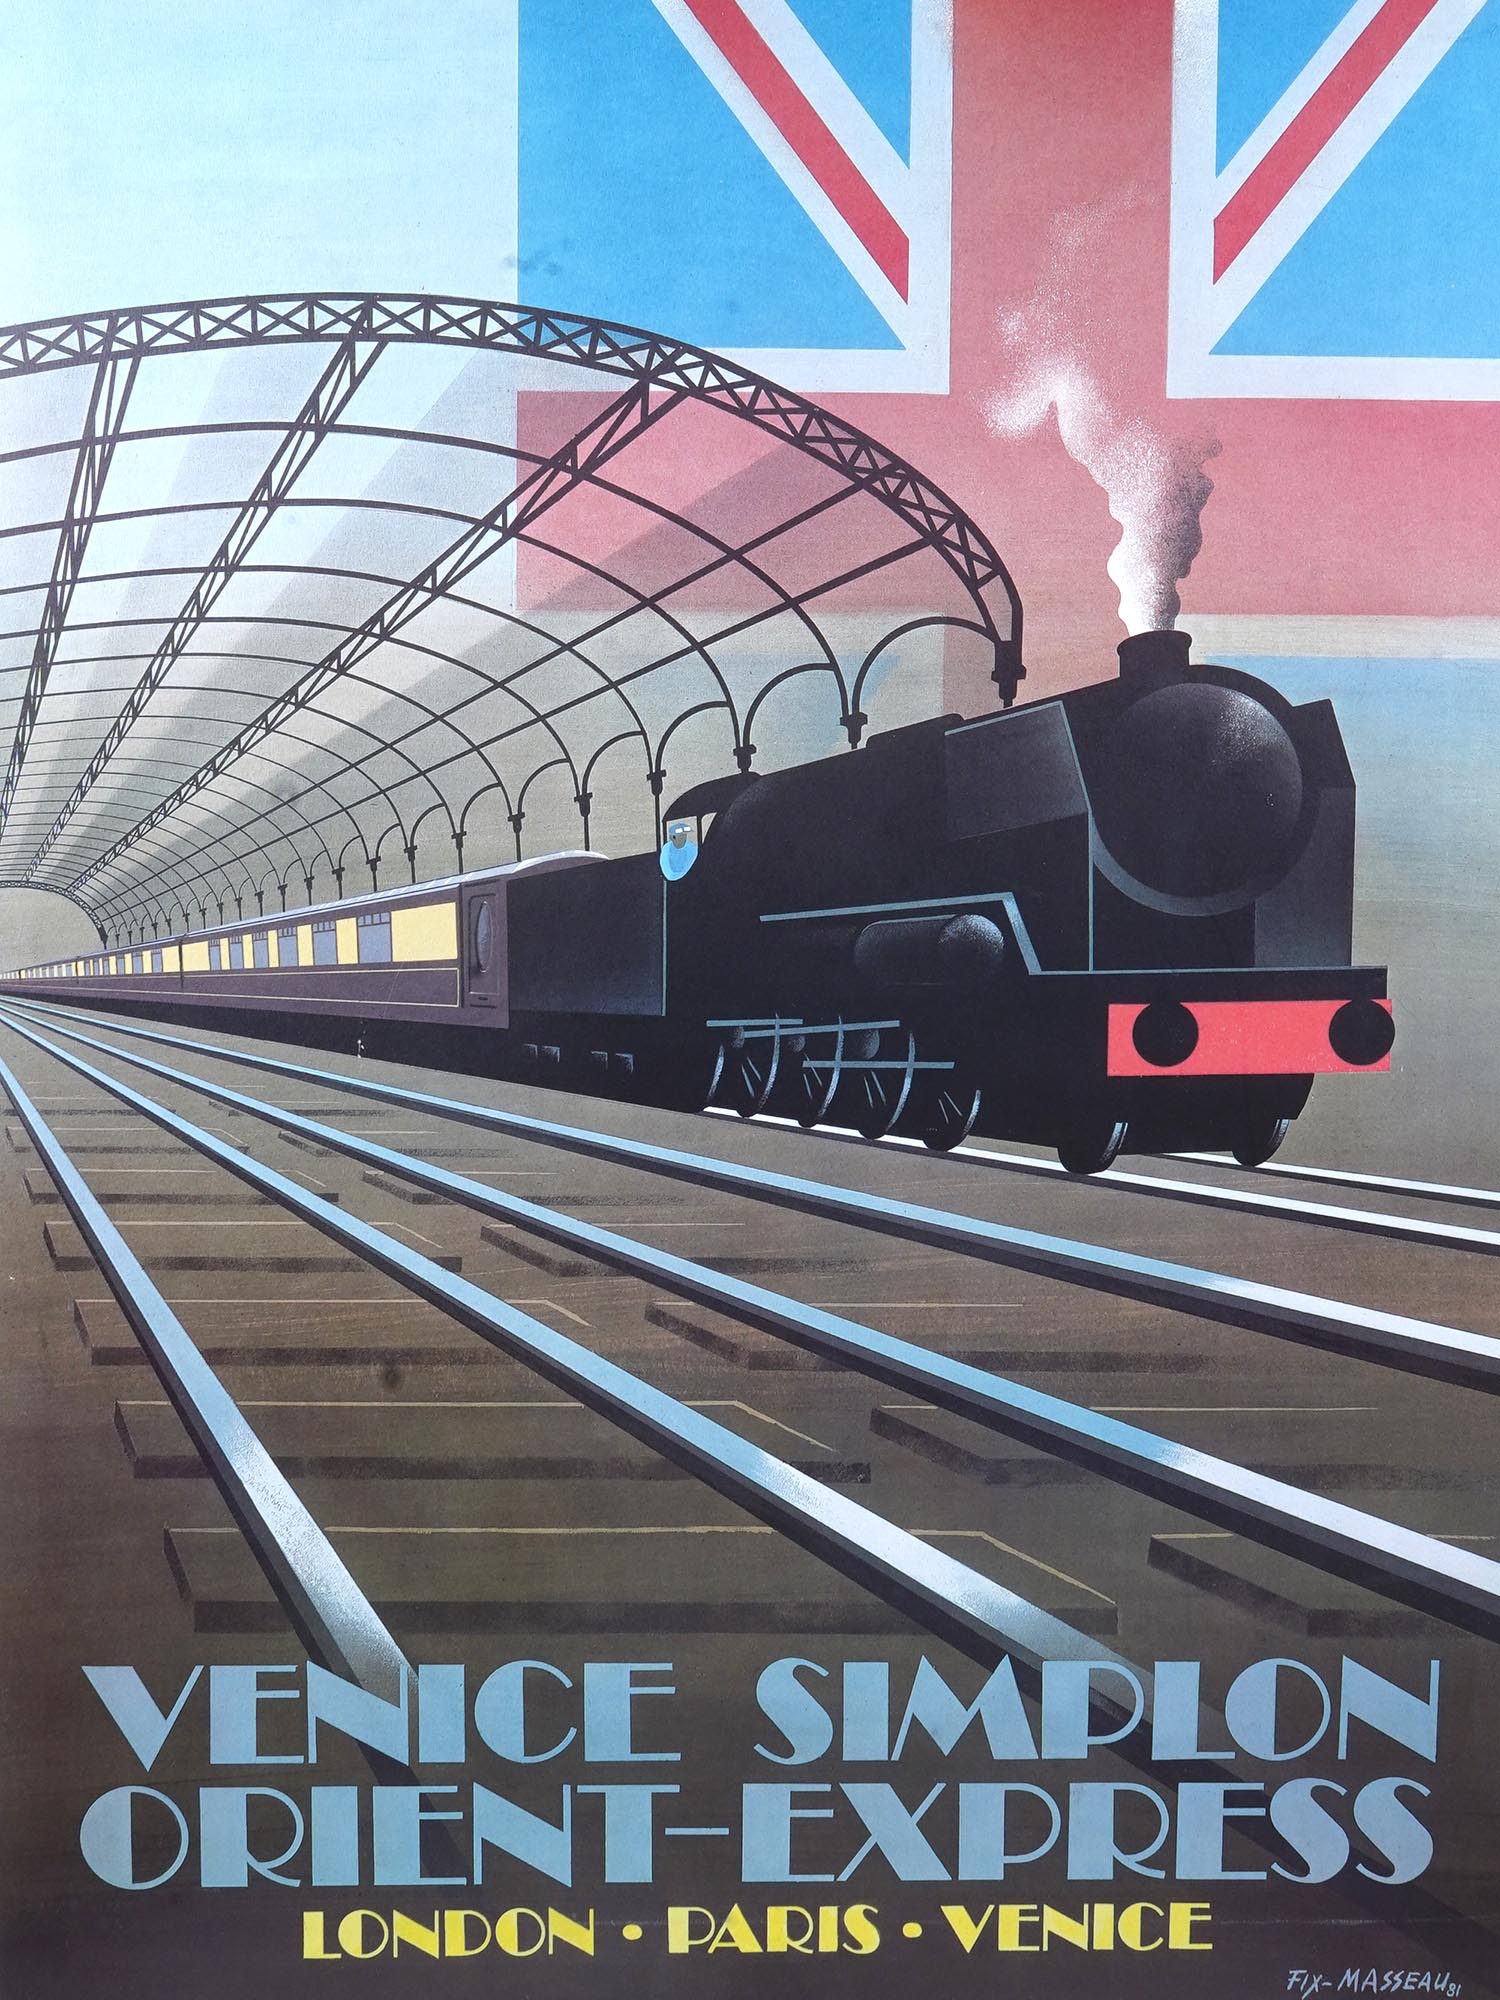 FRENCH ART DECO VICTORIA STATION LONDON TRAVEL POSTER PIC-1